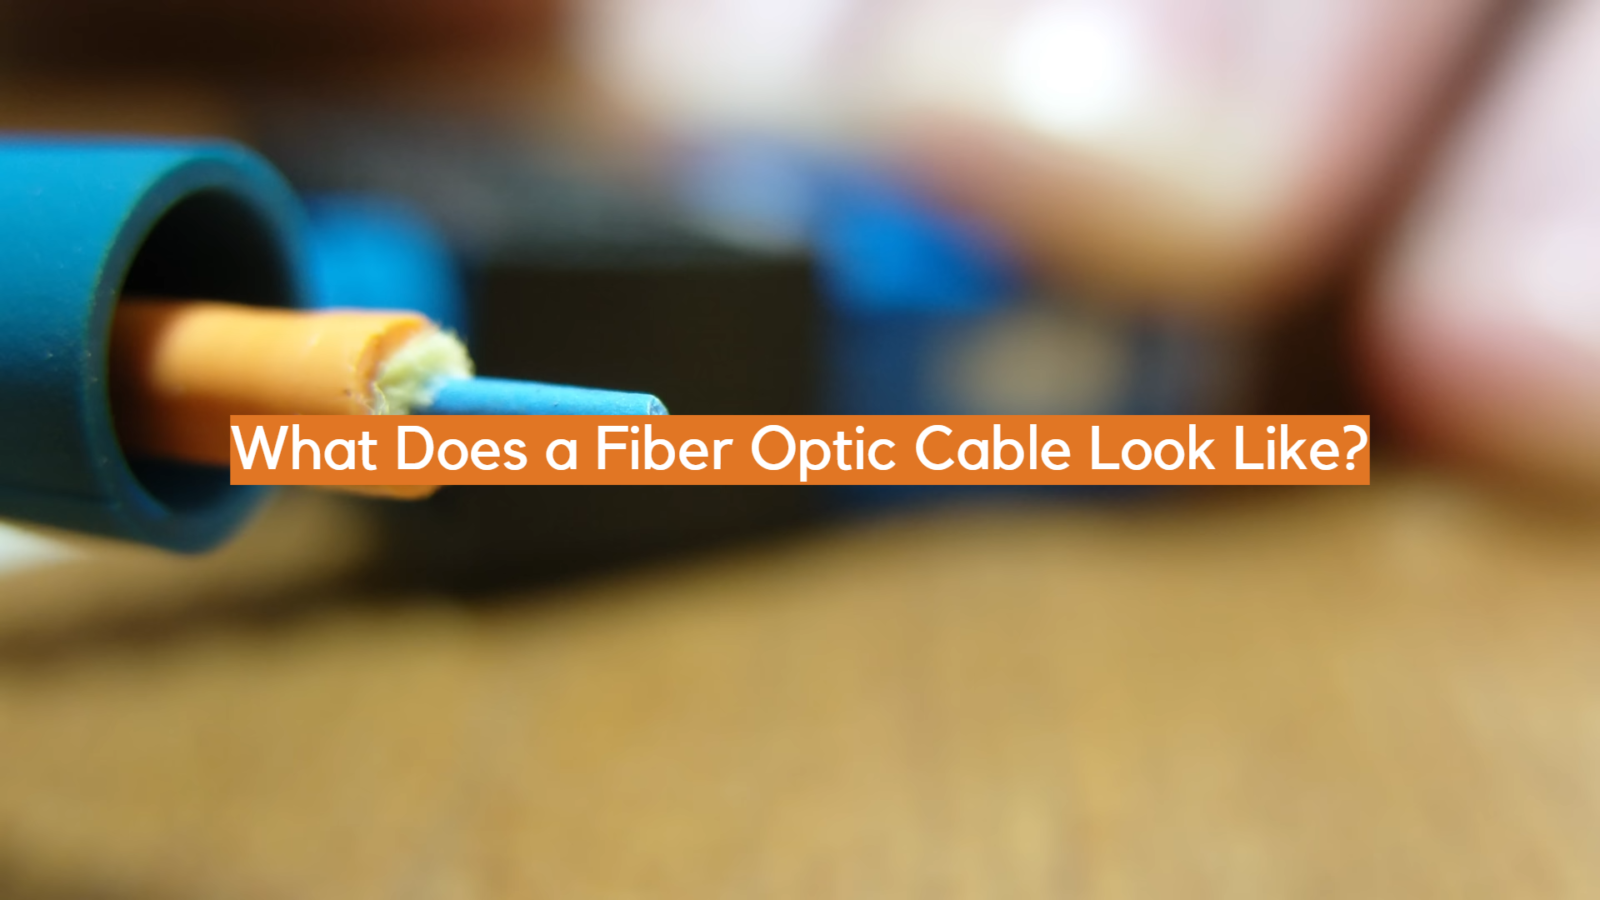 What Does a Fiber Optic Cable Look Like?